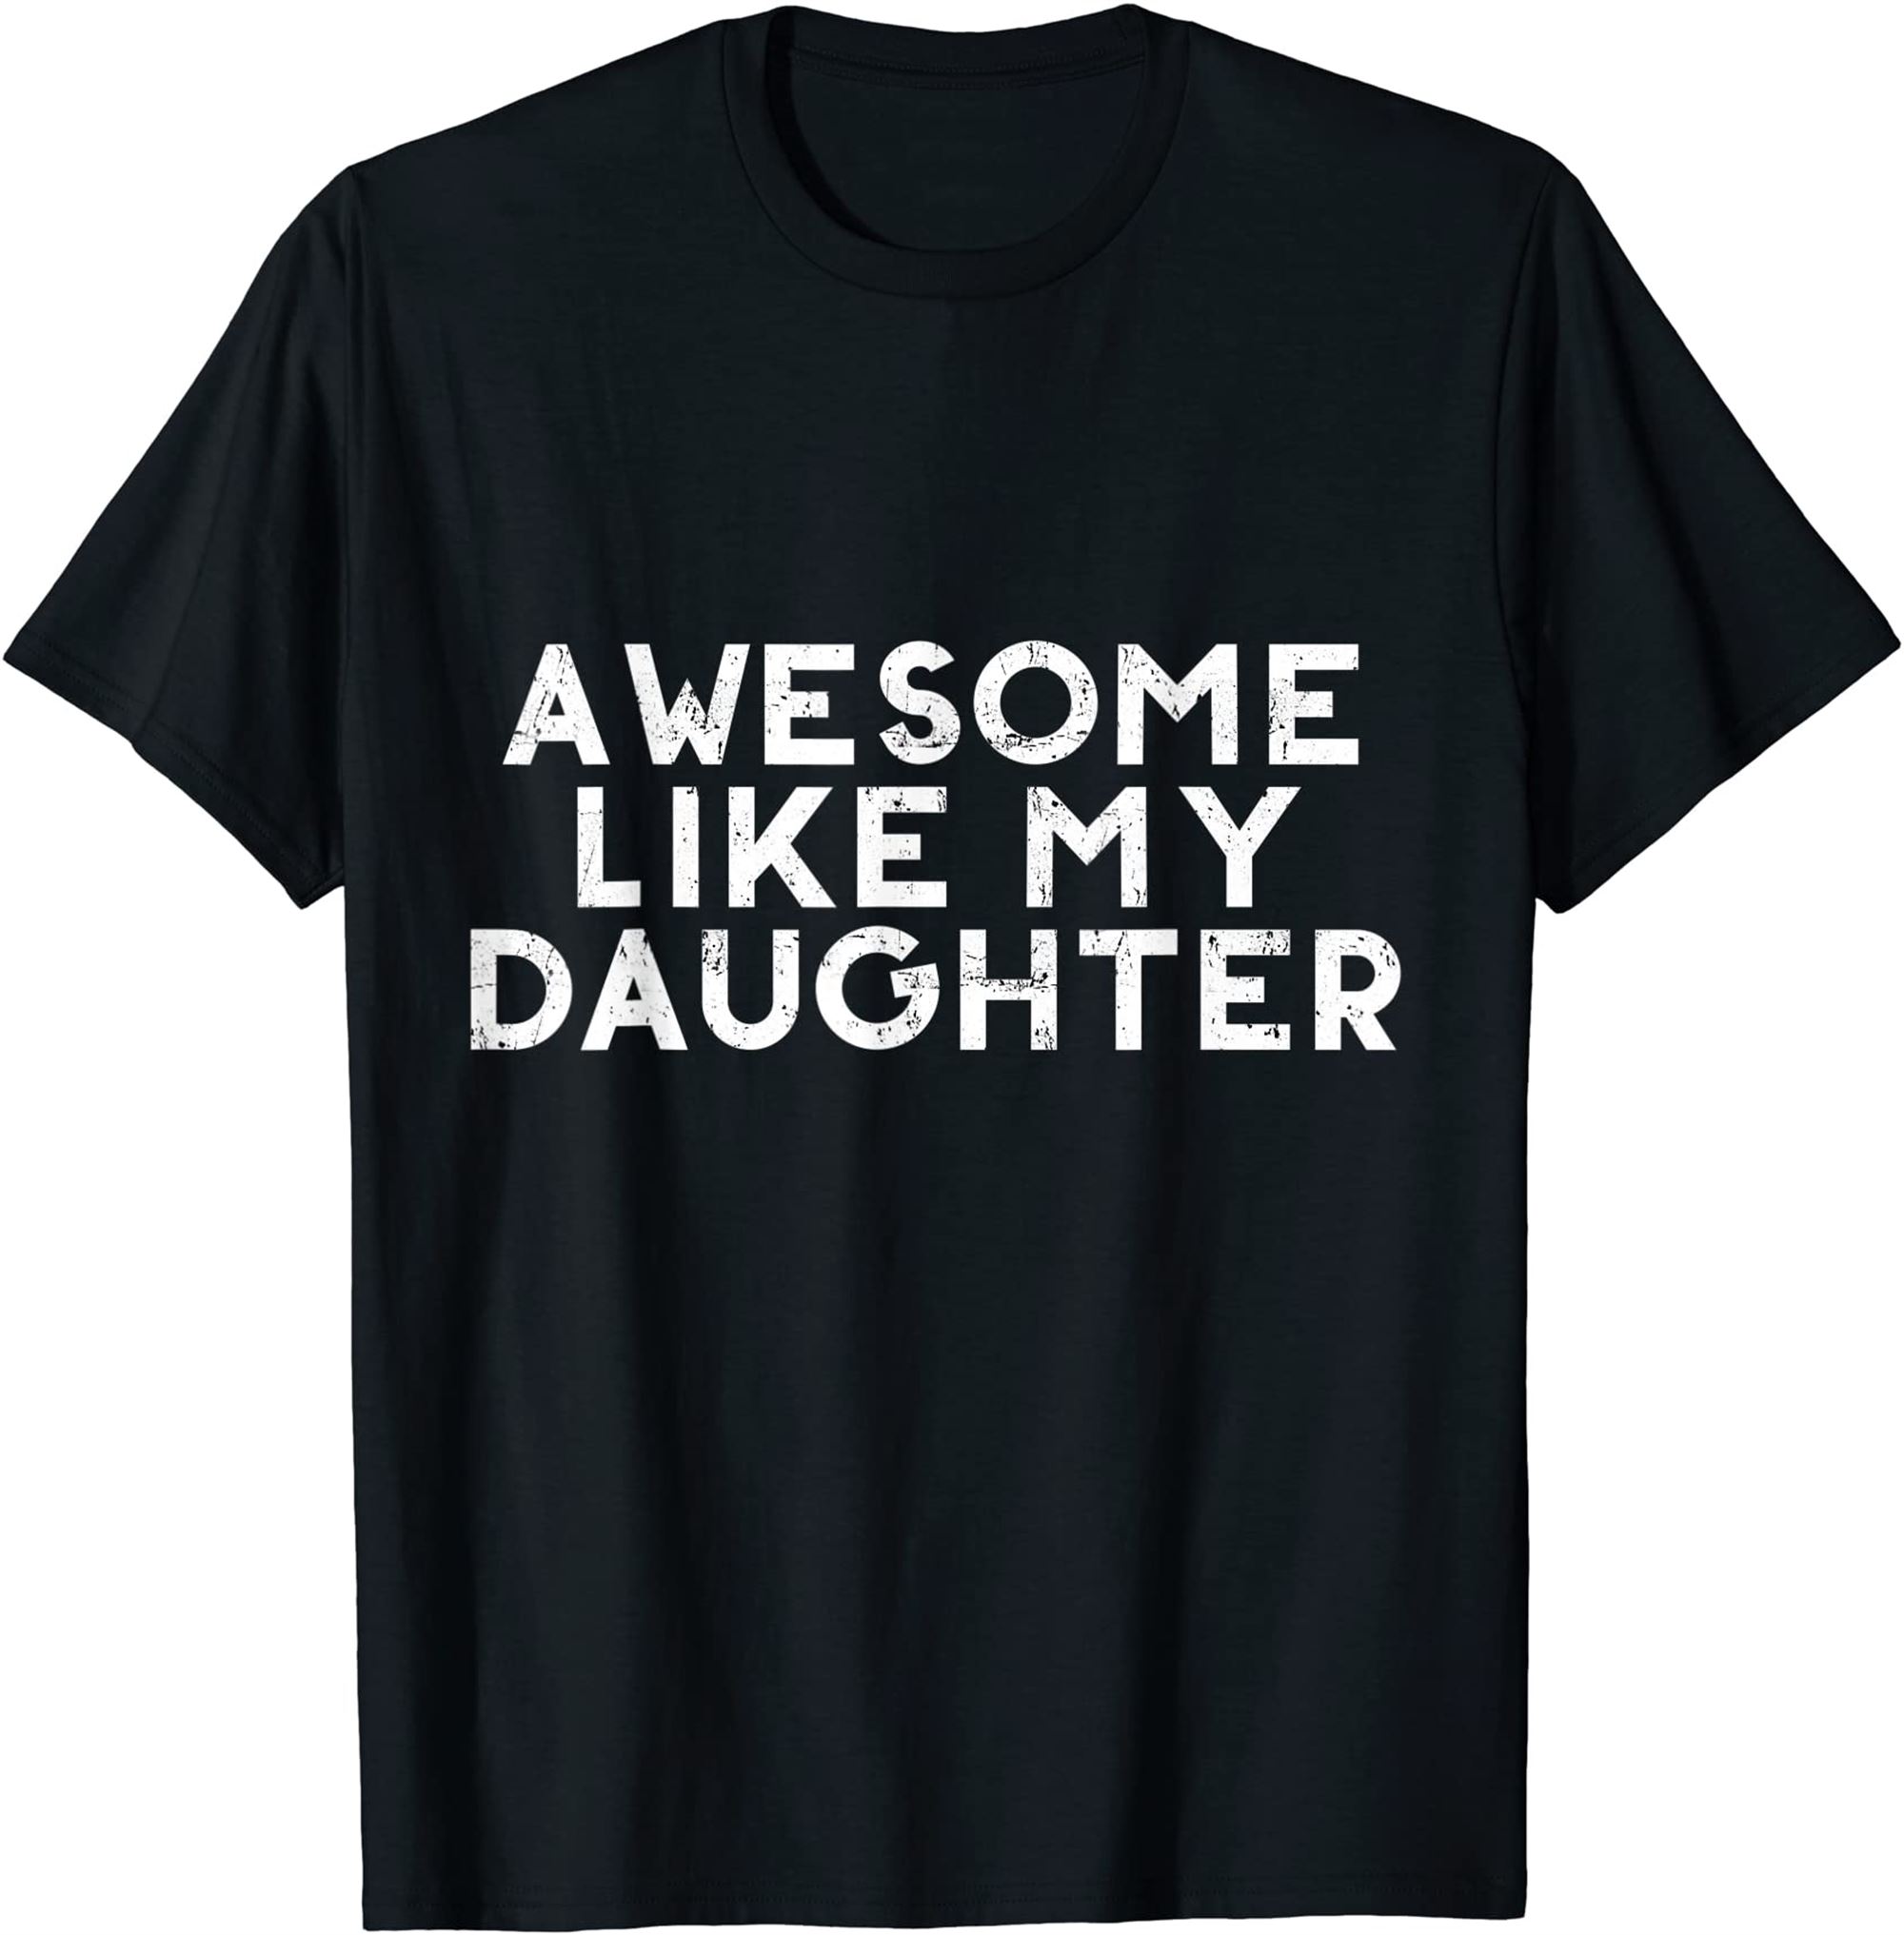 Funny Awesome Like My Daughter Fathers Day Gift Dad Joke T-shirt Full Size Up To 5xl